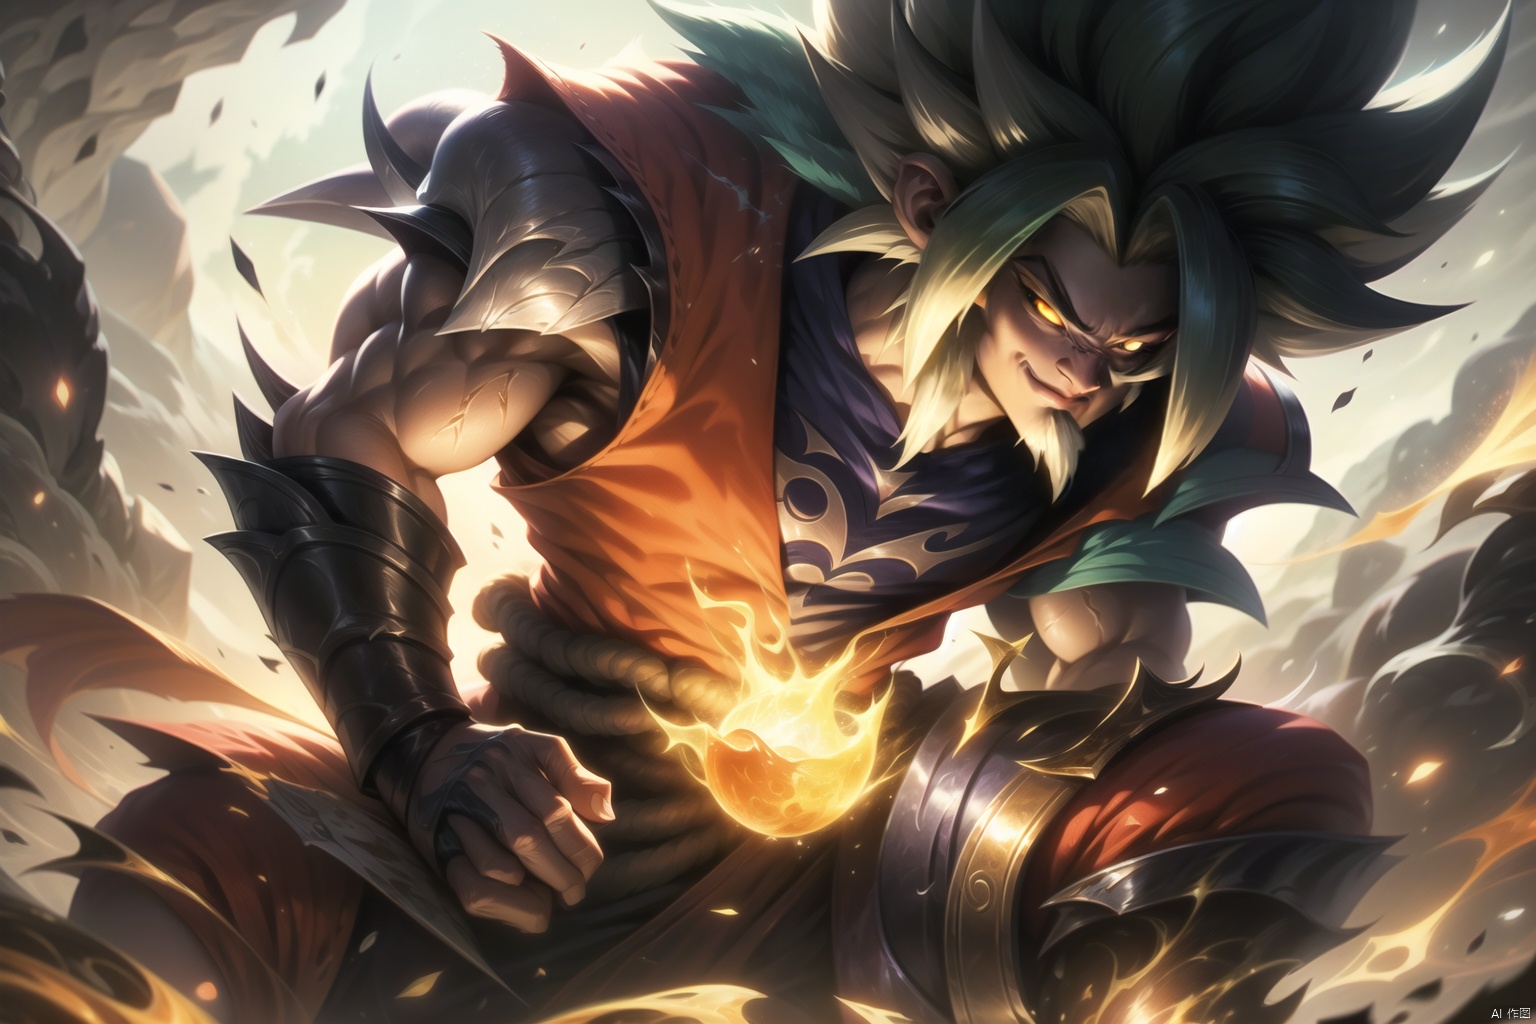  The heroic character in "League of Legends", he wears warrior armor, exudes a green aura, and holds a big knife in his hand. A close-up of a character, this painting adopts the fantasy art style of "League of Legends" illustrations. --ar 128:85, , songoku,black monkey king,uchiha sasuke